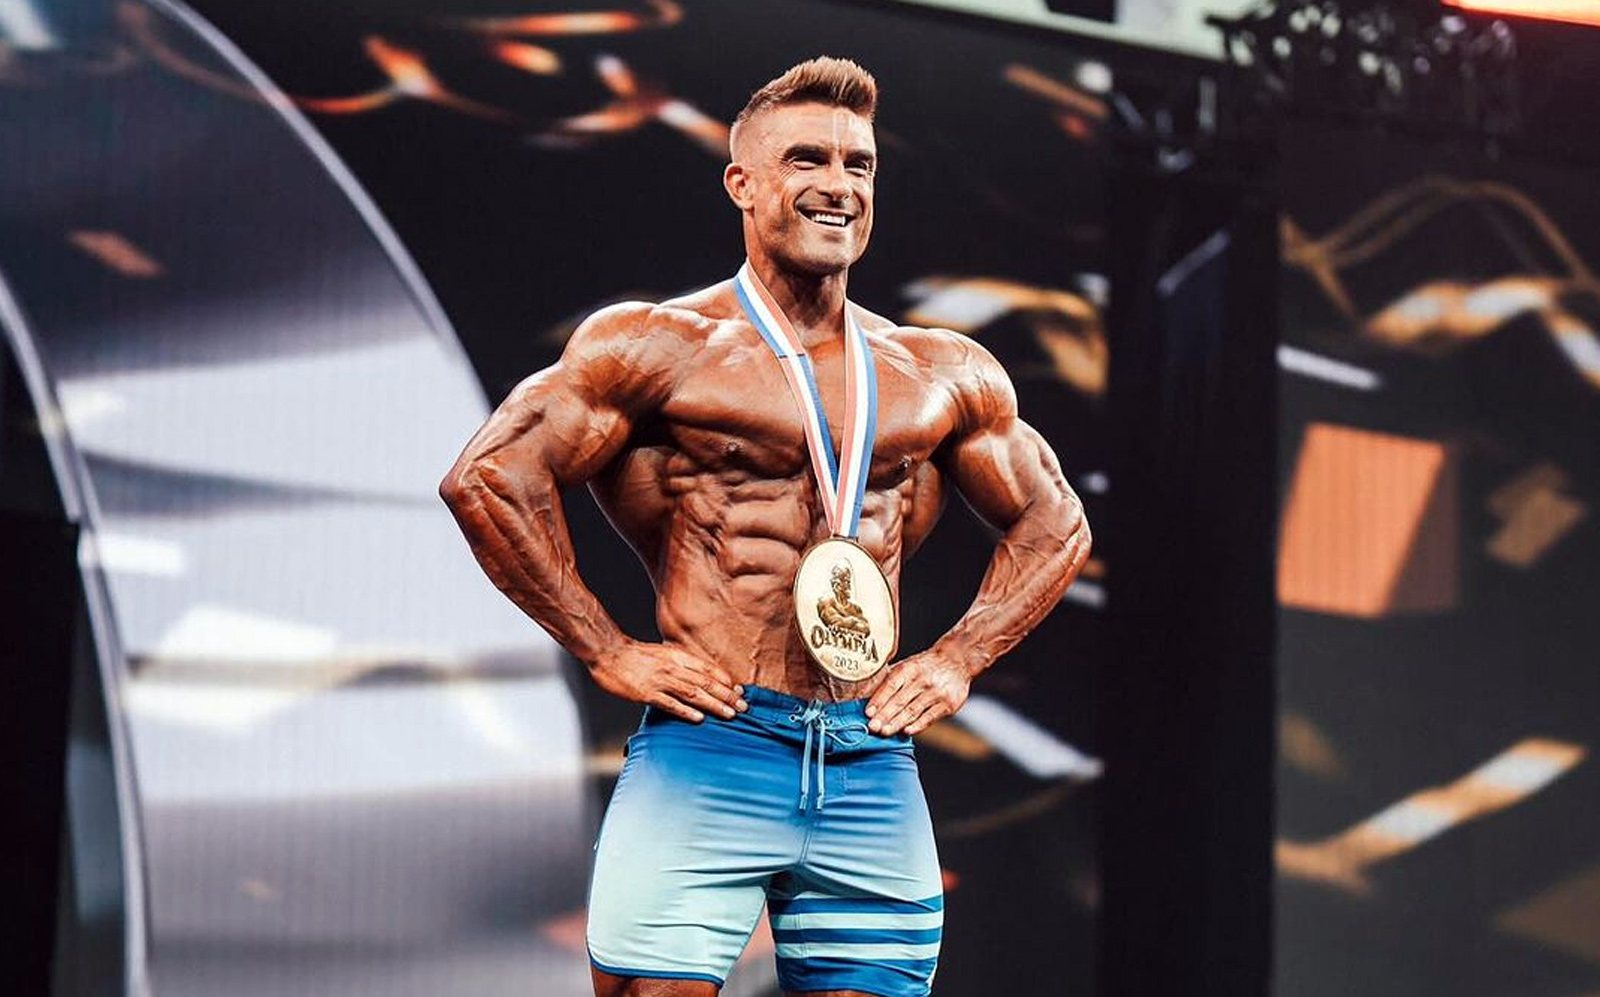 2023 Men’s Physique Olympia Results — Ryan Terry Wins MiddleEasy